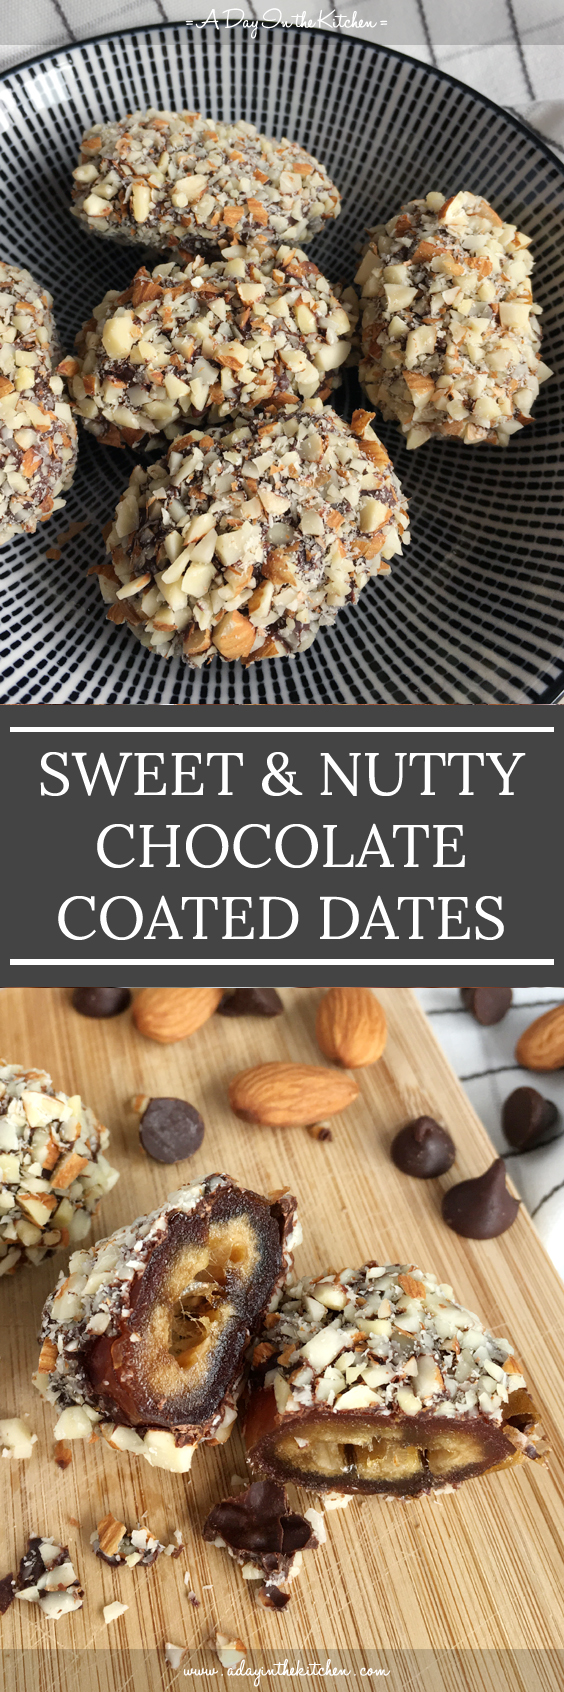 Sweet and Nutty Chocolate Coated Dates | A DAY IN THE KITCHEN